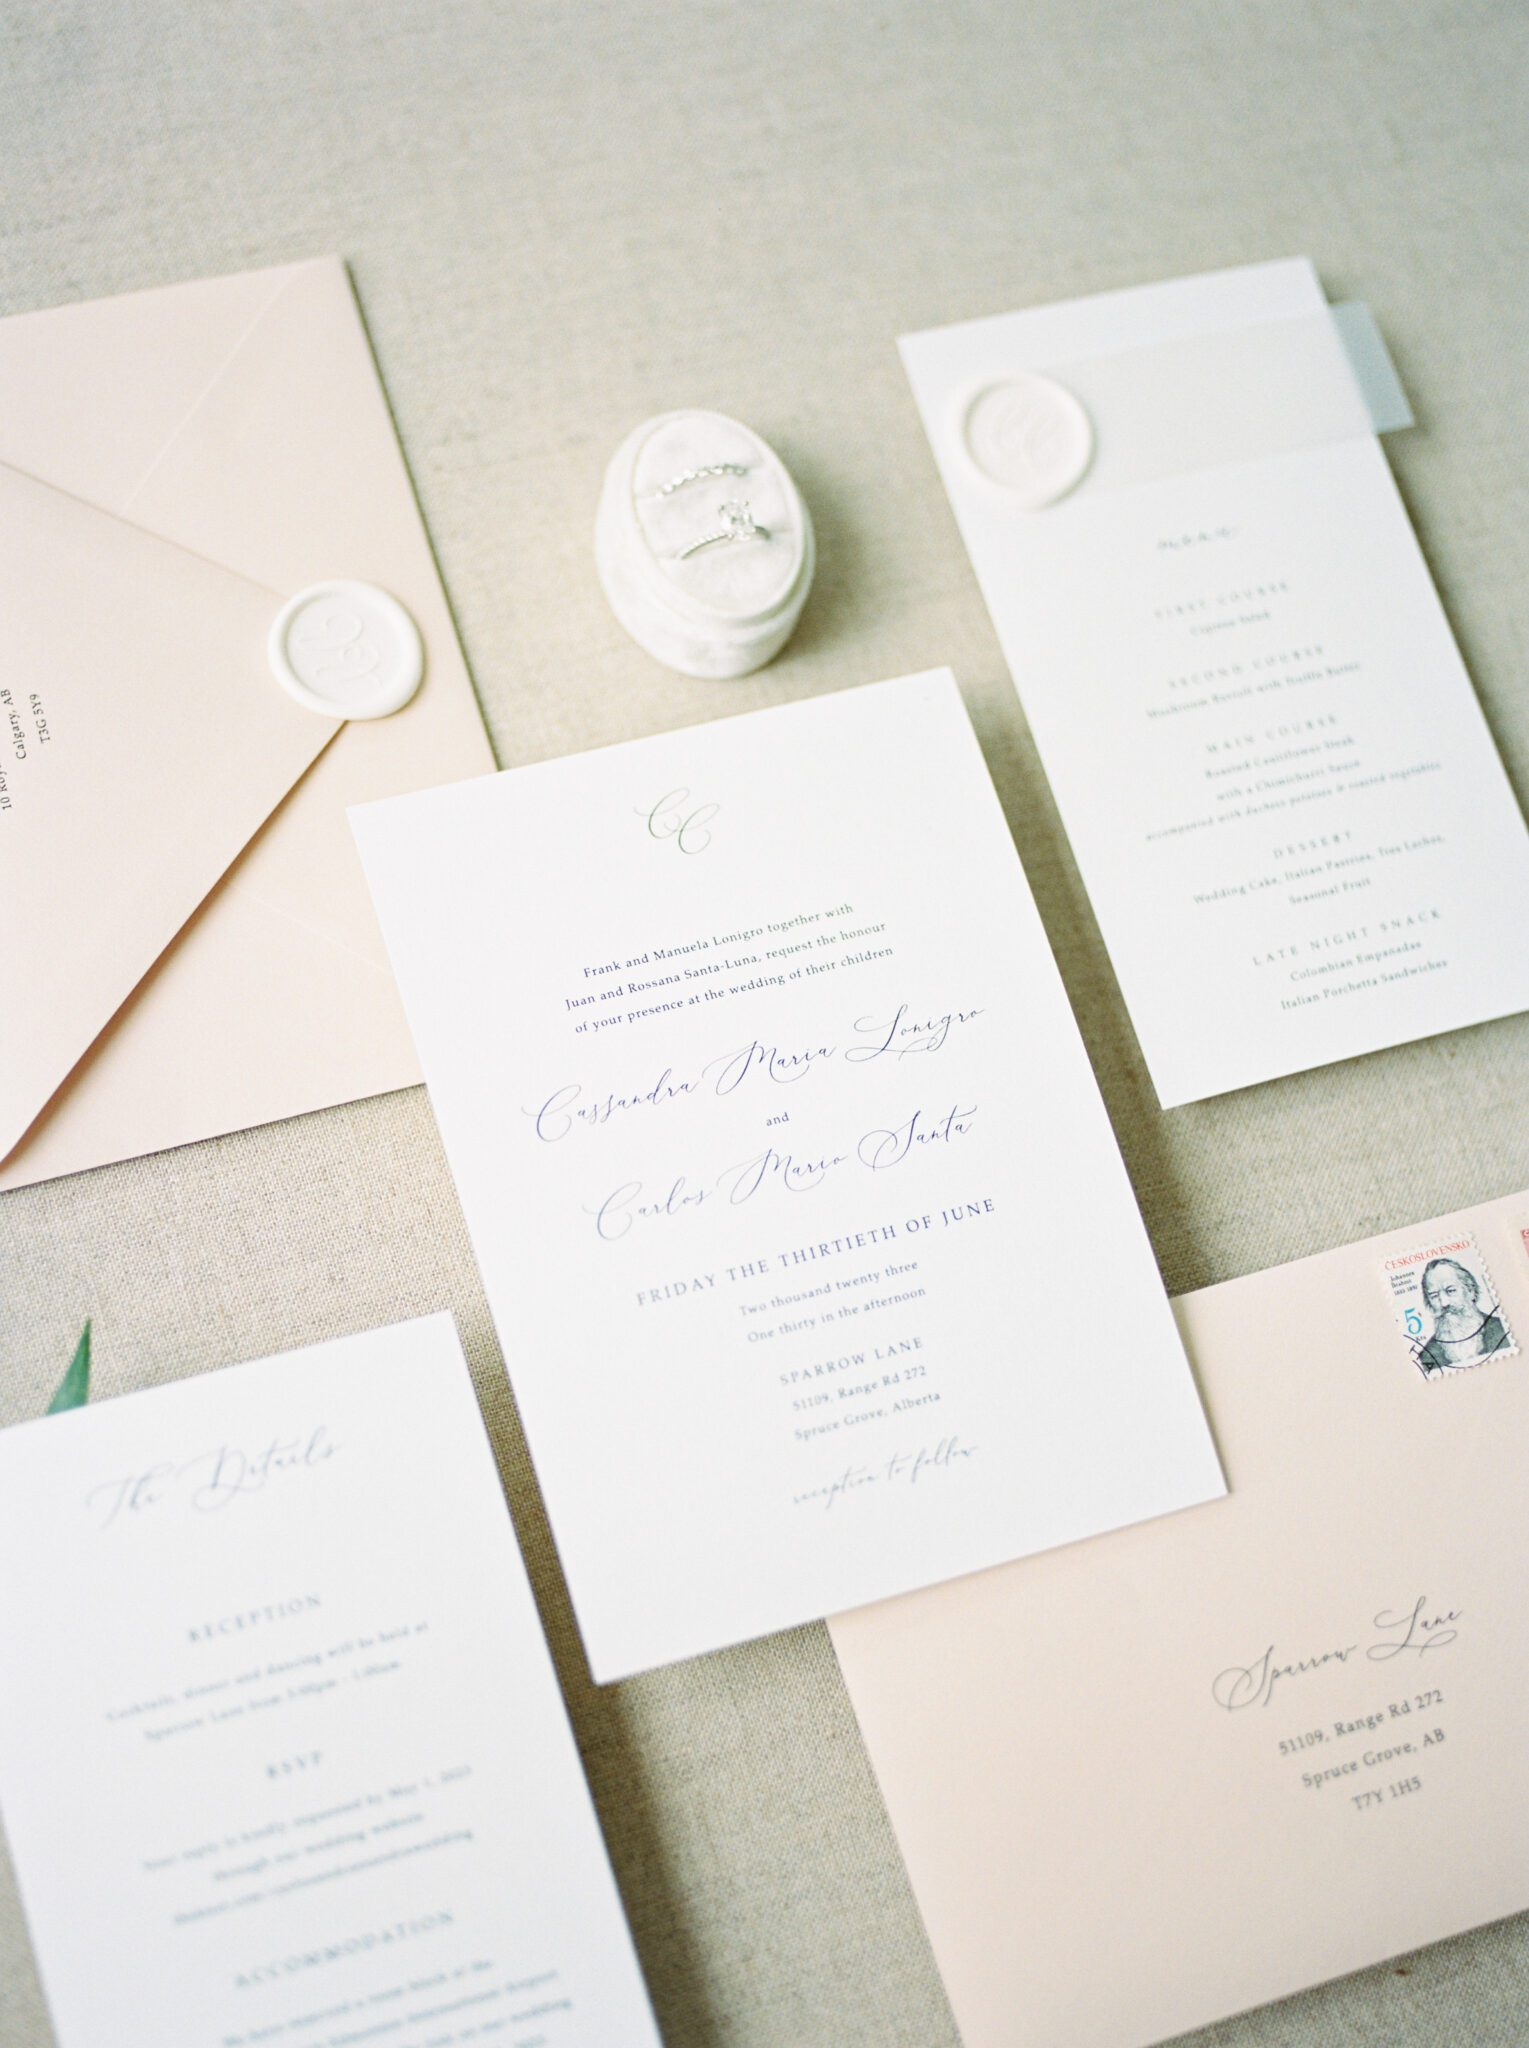 Classic and elegant white and blush wedding invitation paper suite captured by Jenny Jean Photography.